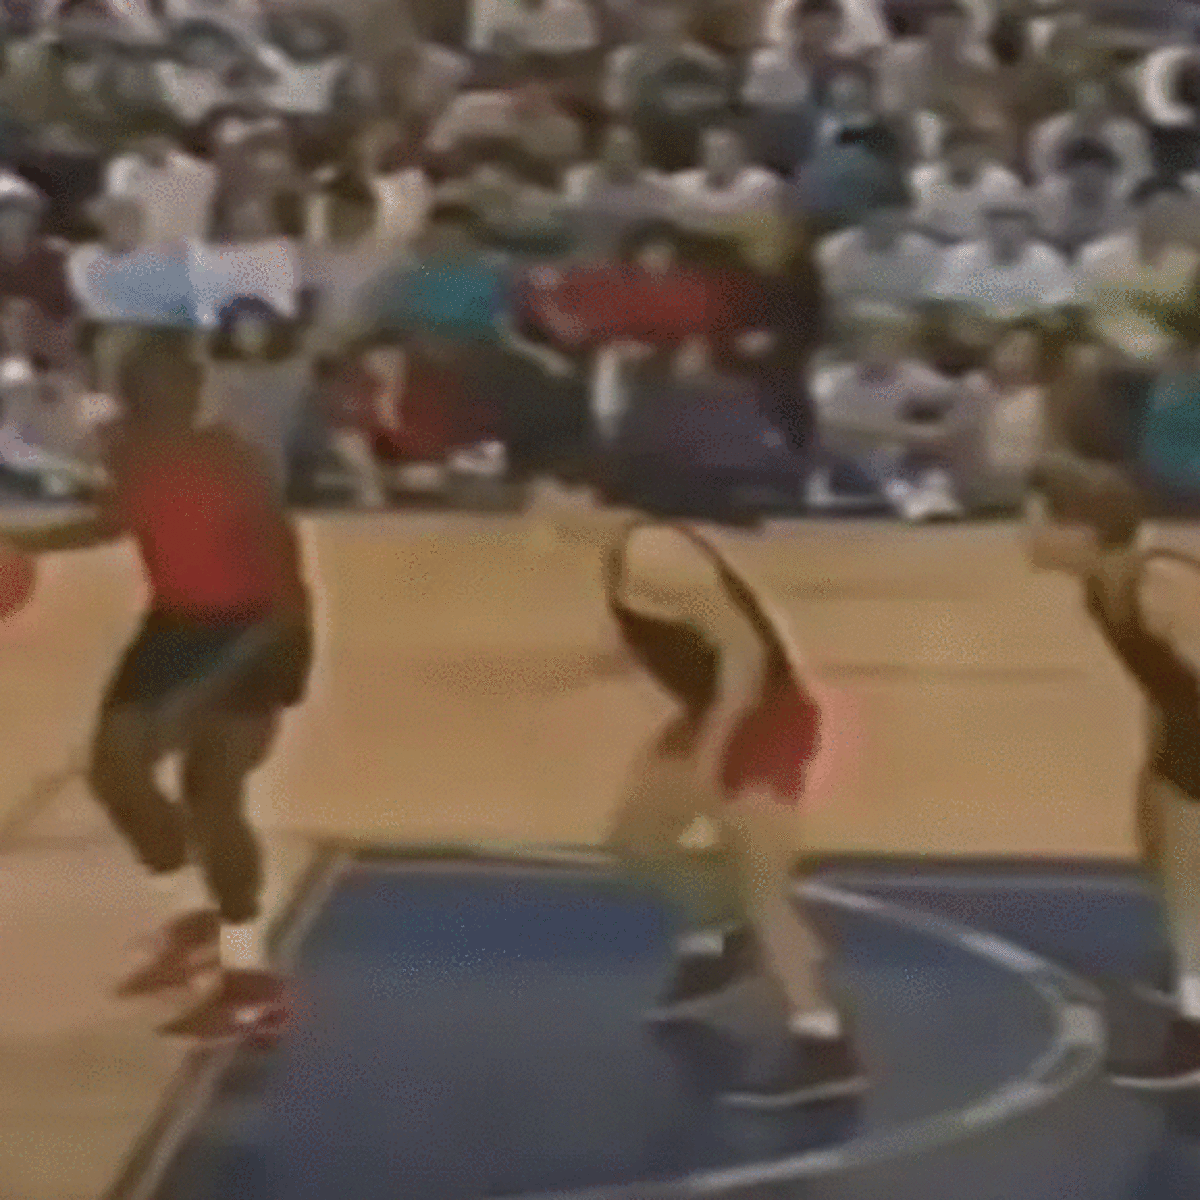 Colonial koste arm Michael Jordan In His Prime Played Against Charlie Sheen And His Father  2-On-1 - Fadeaway World